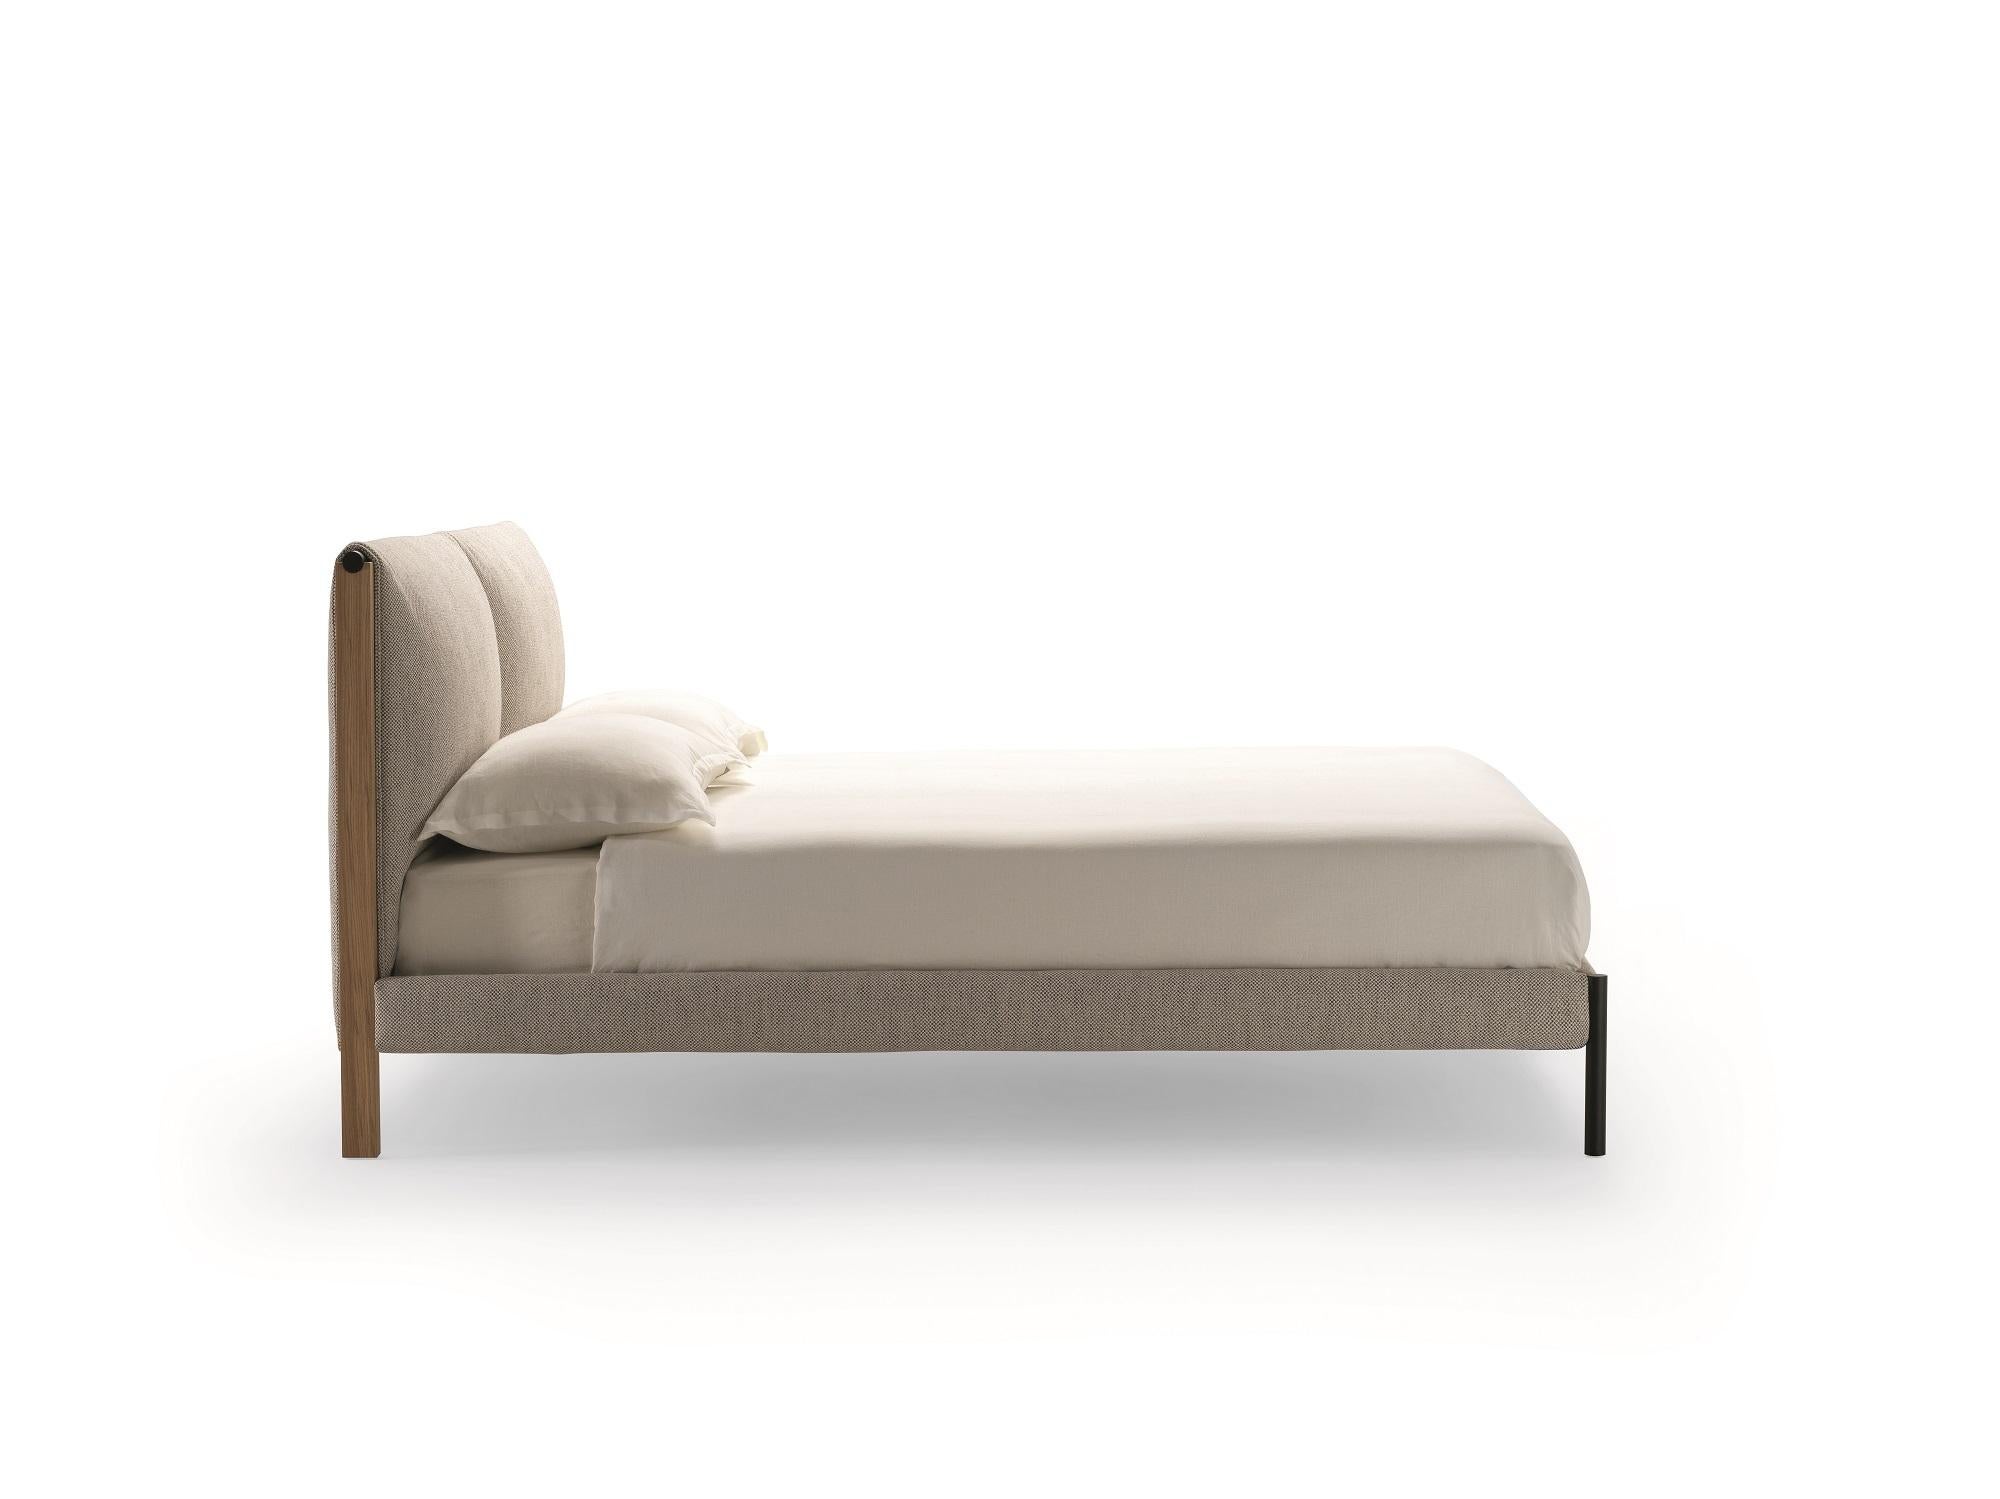 Zanotta Medium Ricordi Bed with Single Springing in Toce Upholstery by Spalvieri & Del Ciotto

Bed with single springing. Headboard frame in natural or in open pore black painted oak. Upholstery in polyurethane/heat-bound polyester fibre. Front